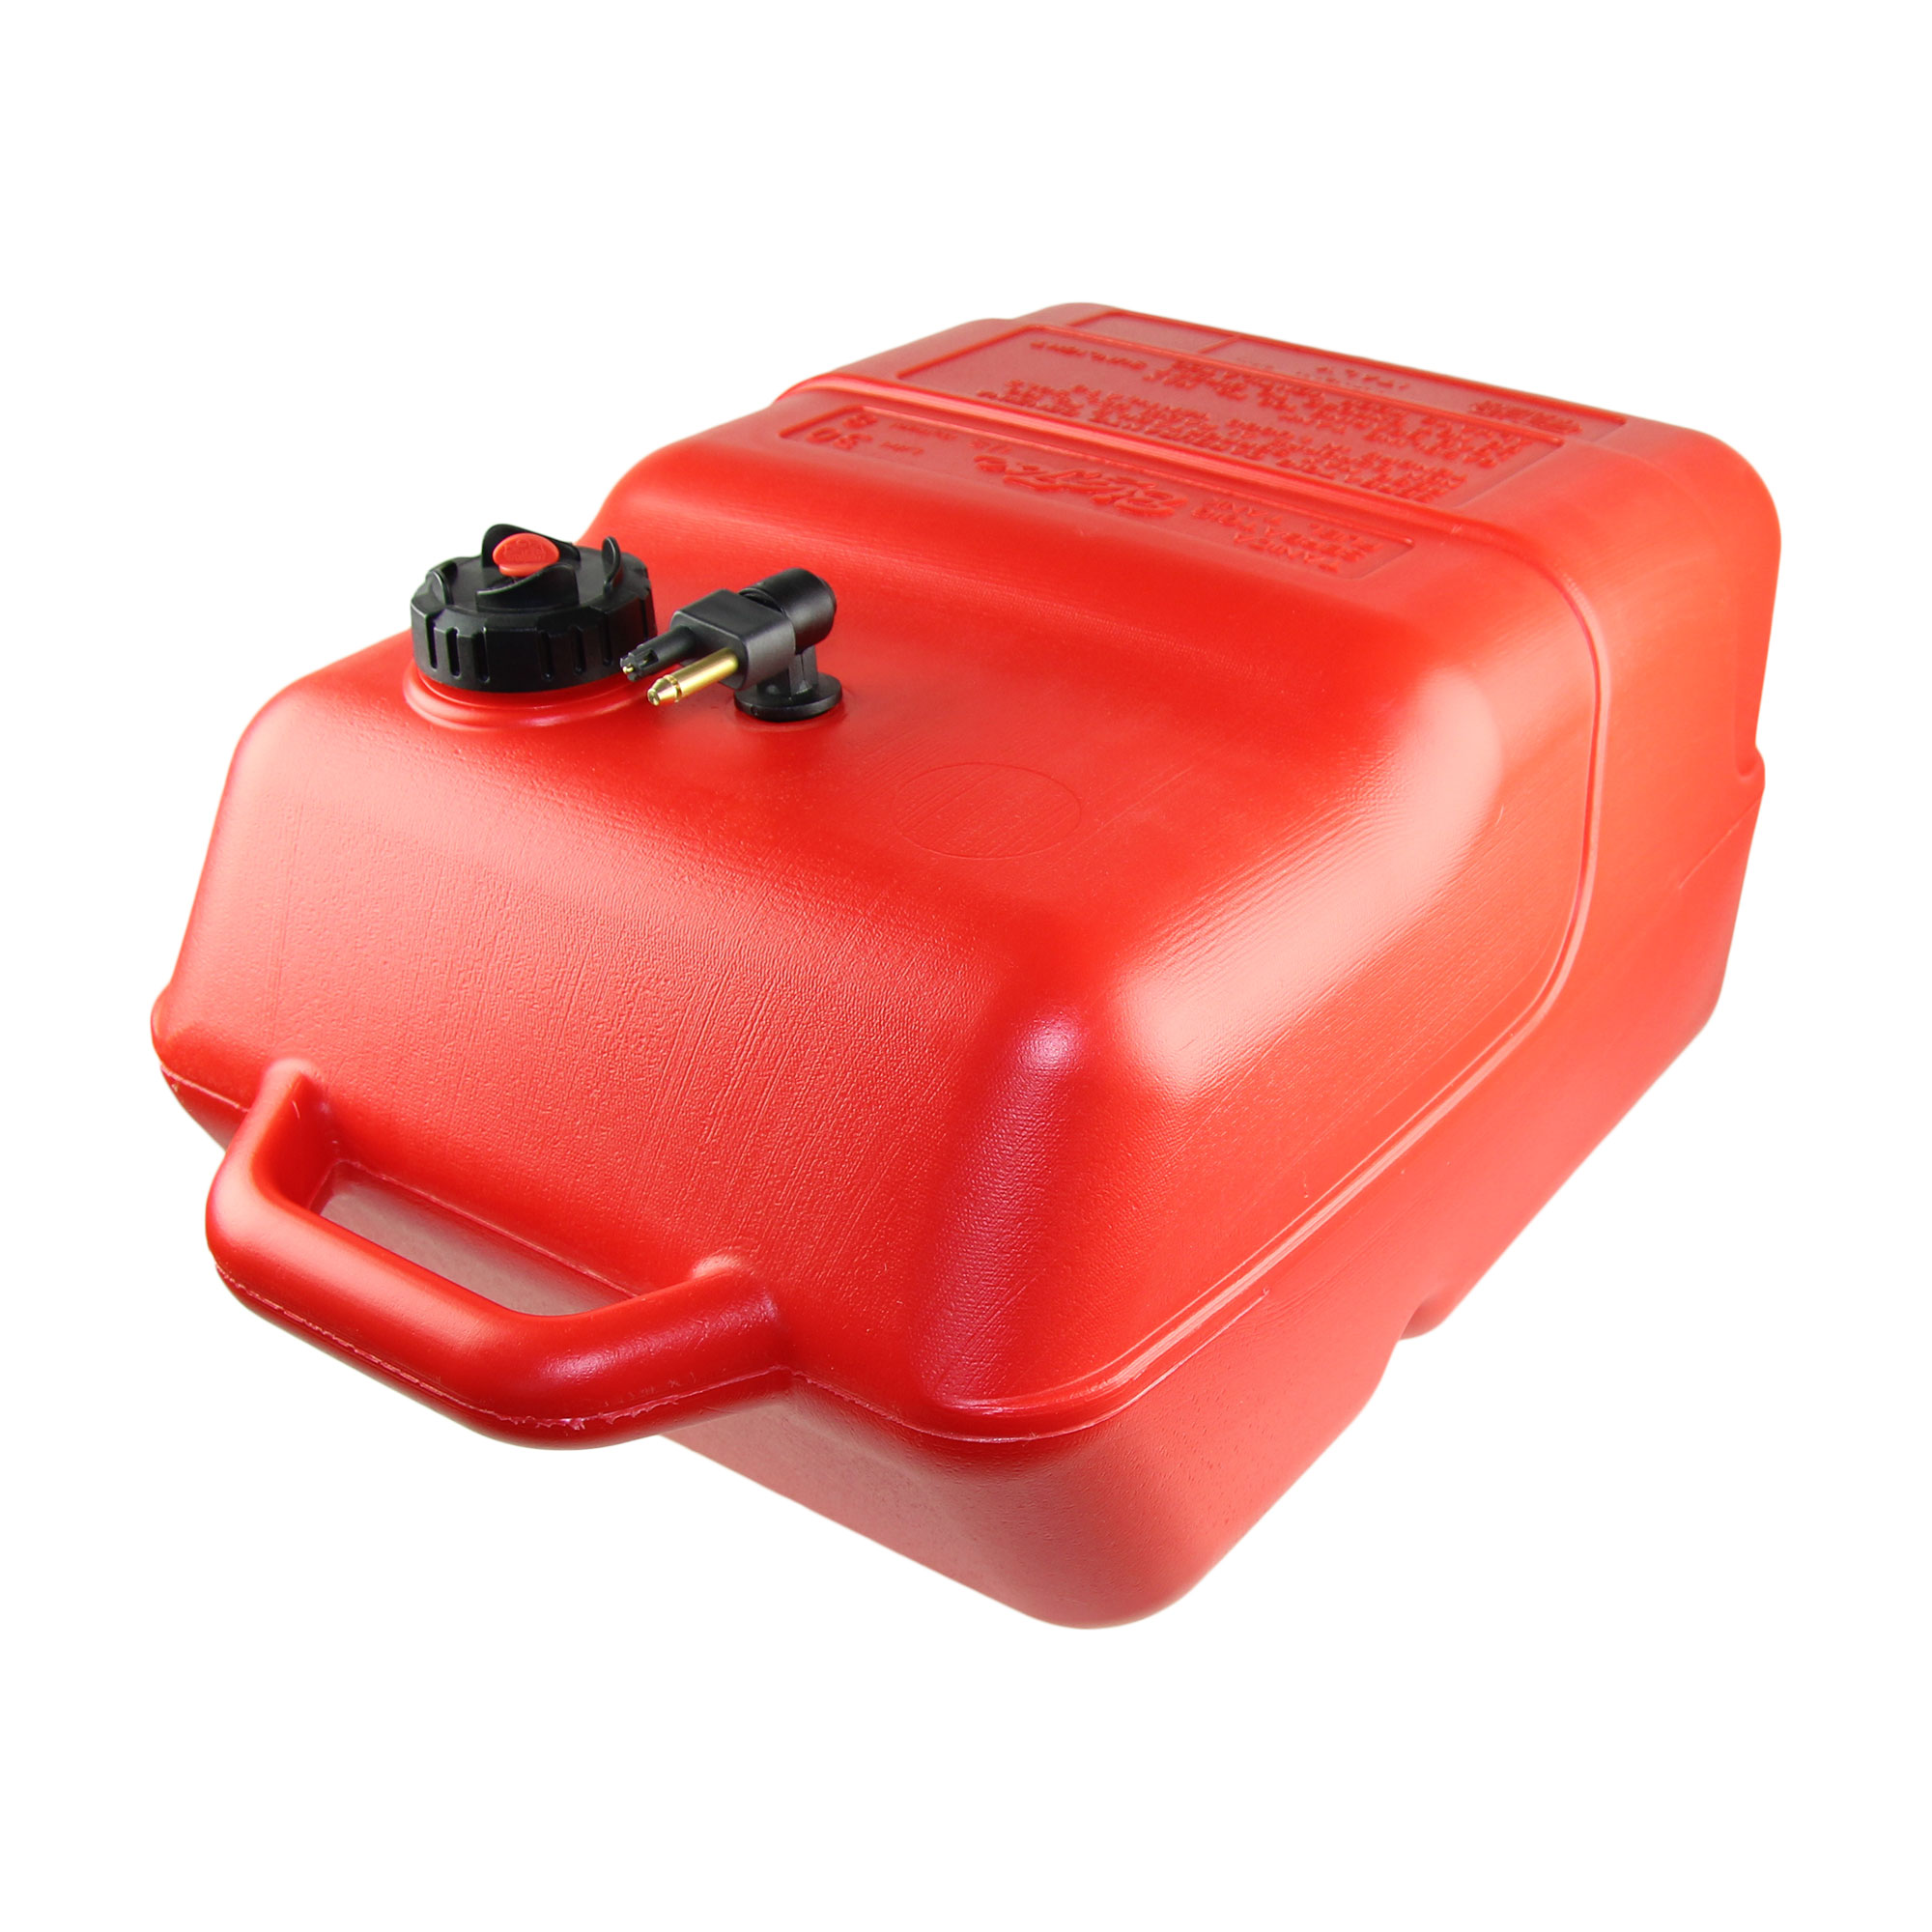 Fuel tank red with Mercury & Mariner connection